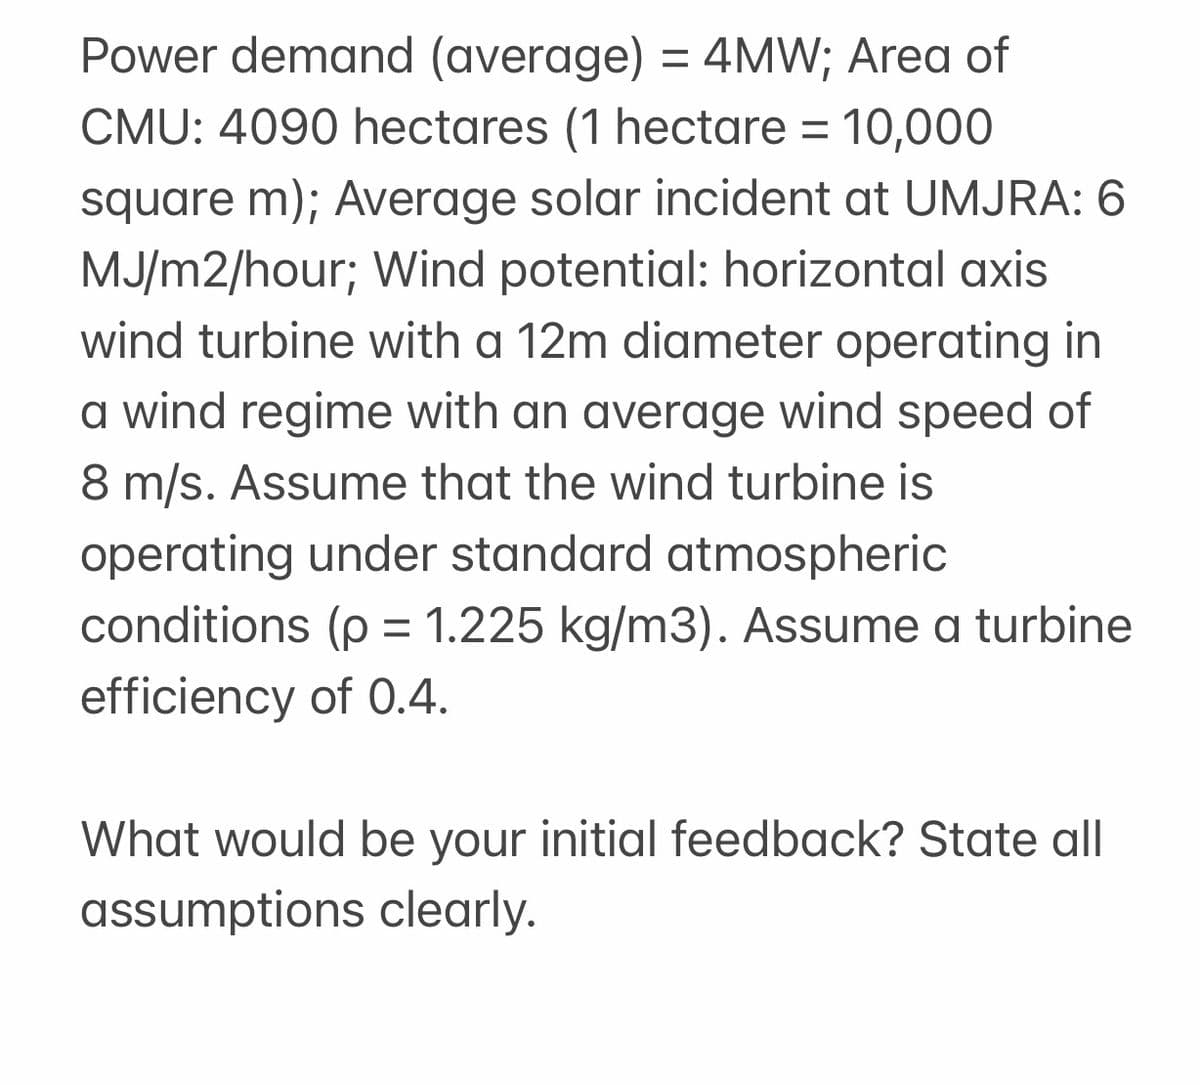 Power demand (average) = 4MW; Area of
CMU: 4090 hectares (1 hectare = 10,000
square m); Average solar incident at UMJRA: 6
MJ/m2/hour; Wind potential: horizontal axis
wind turbine with a 12m diameter operating in
a wind regime with an average wind speed of
8 m/s. Assume that the wind turbine is
operating under standard atmospheric
conditions (p = 1.225 kg/m3). Assume a turbine
efficiency of 0.4.
What would be your initial feedback? State all
assumptions clearly.
